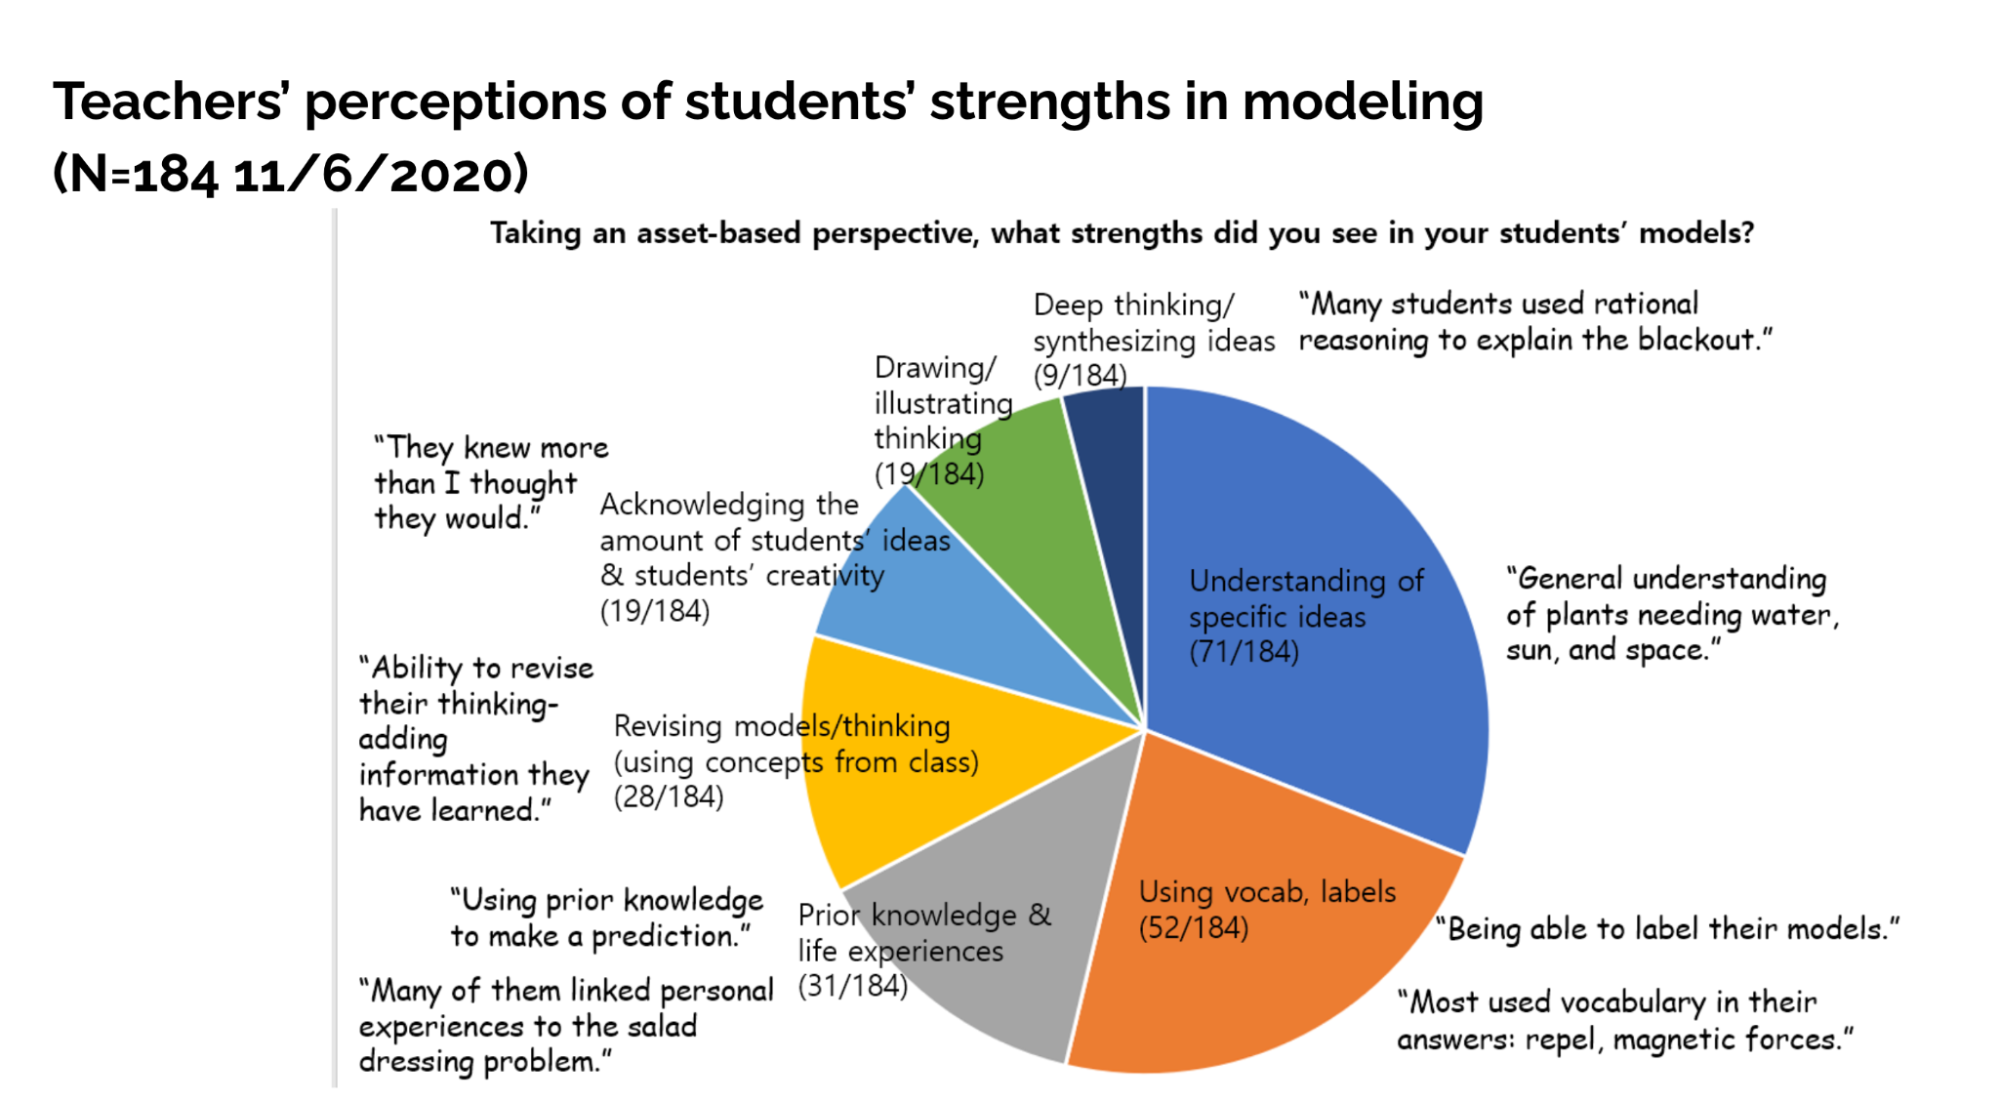 A pie chart of teachers' perceptions of students' strengths in modeling (N=184 11/6/2020). When asked Taking an asset-based perspective, what strengths did you see in your students' models? the largest response "Understanding of specific ideas" with 71 out of 184 responses, and the lowest response was "Deep thinking/synthesizing ideas" with 9 out of 184 responses. 